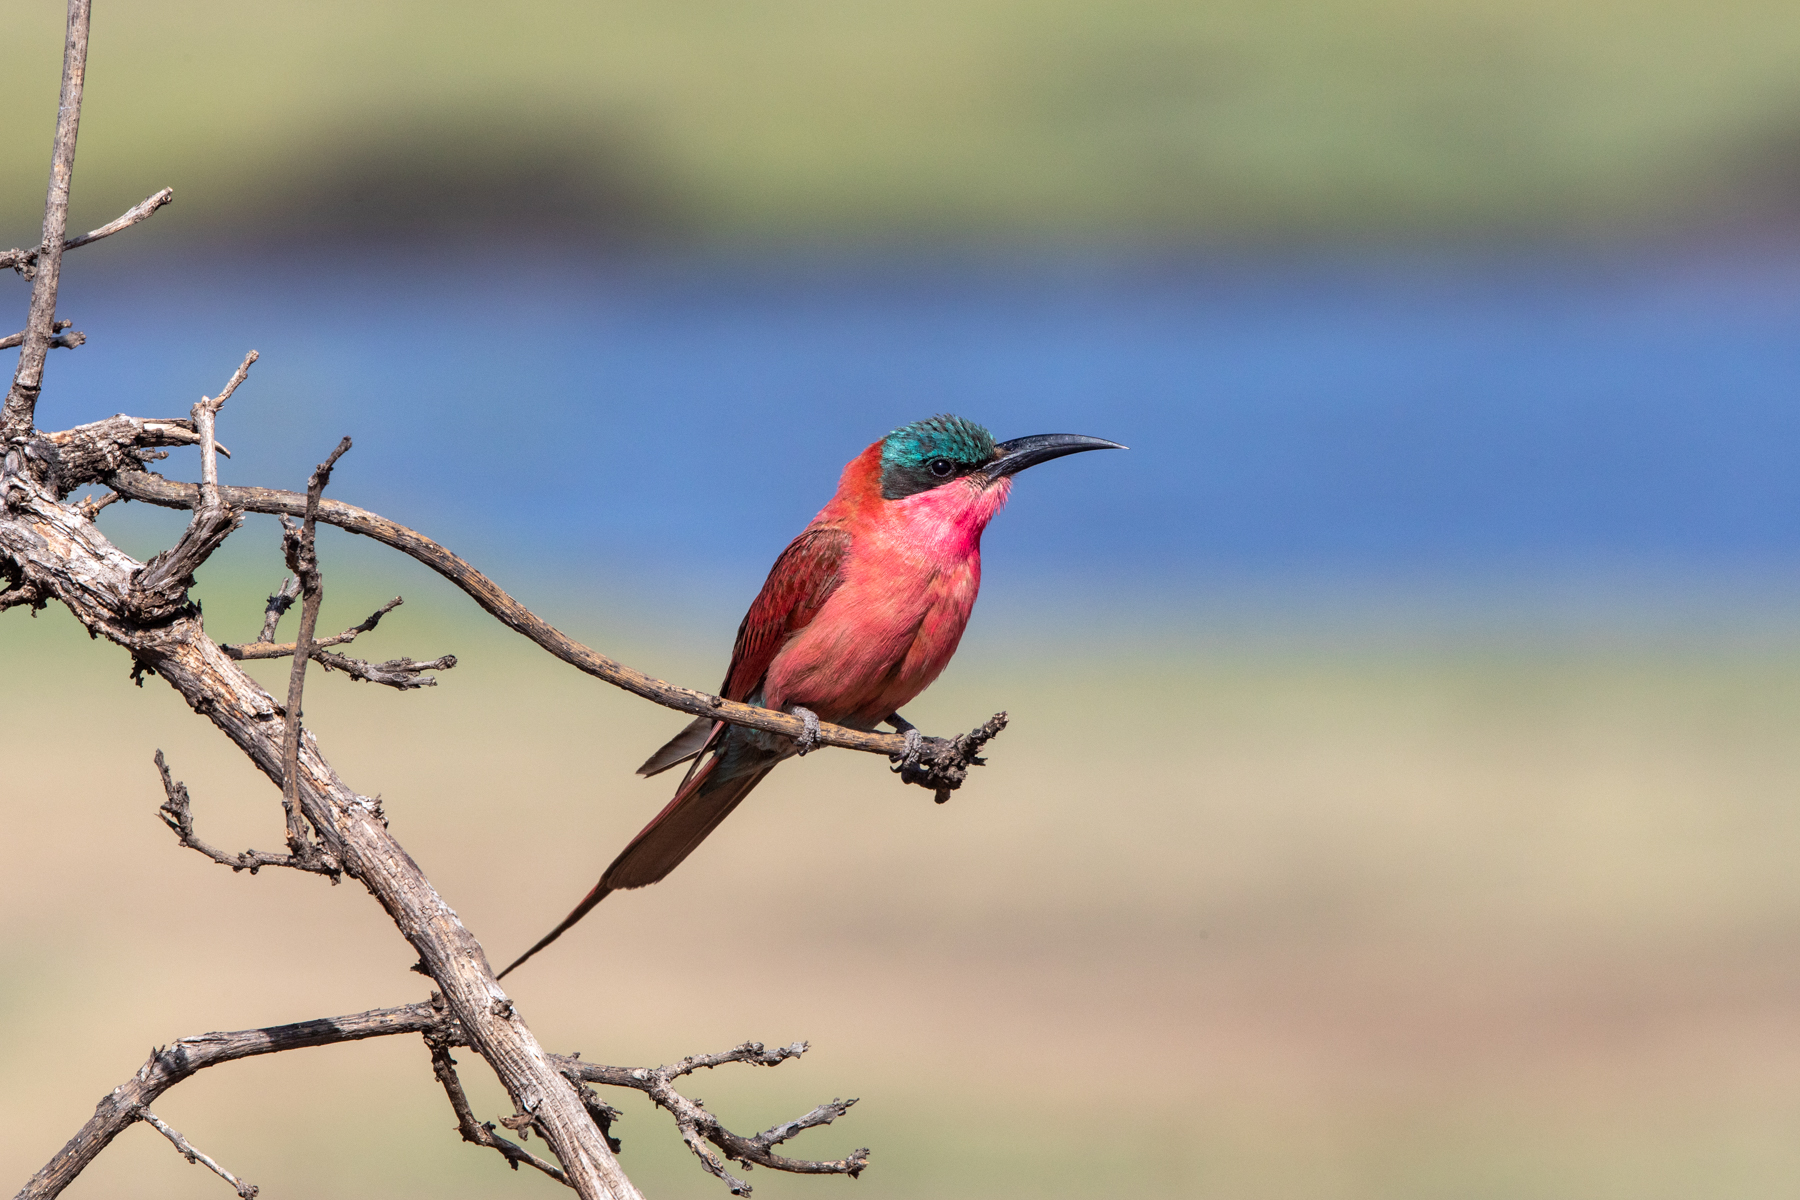 The dazzling Southern Carmine Bee-eater at the Chobe River, Botswana